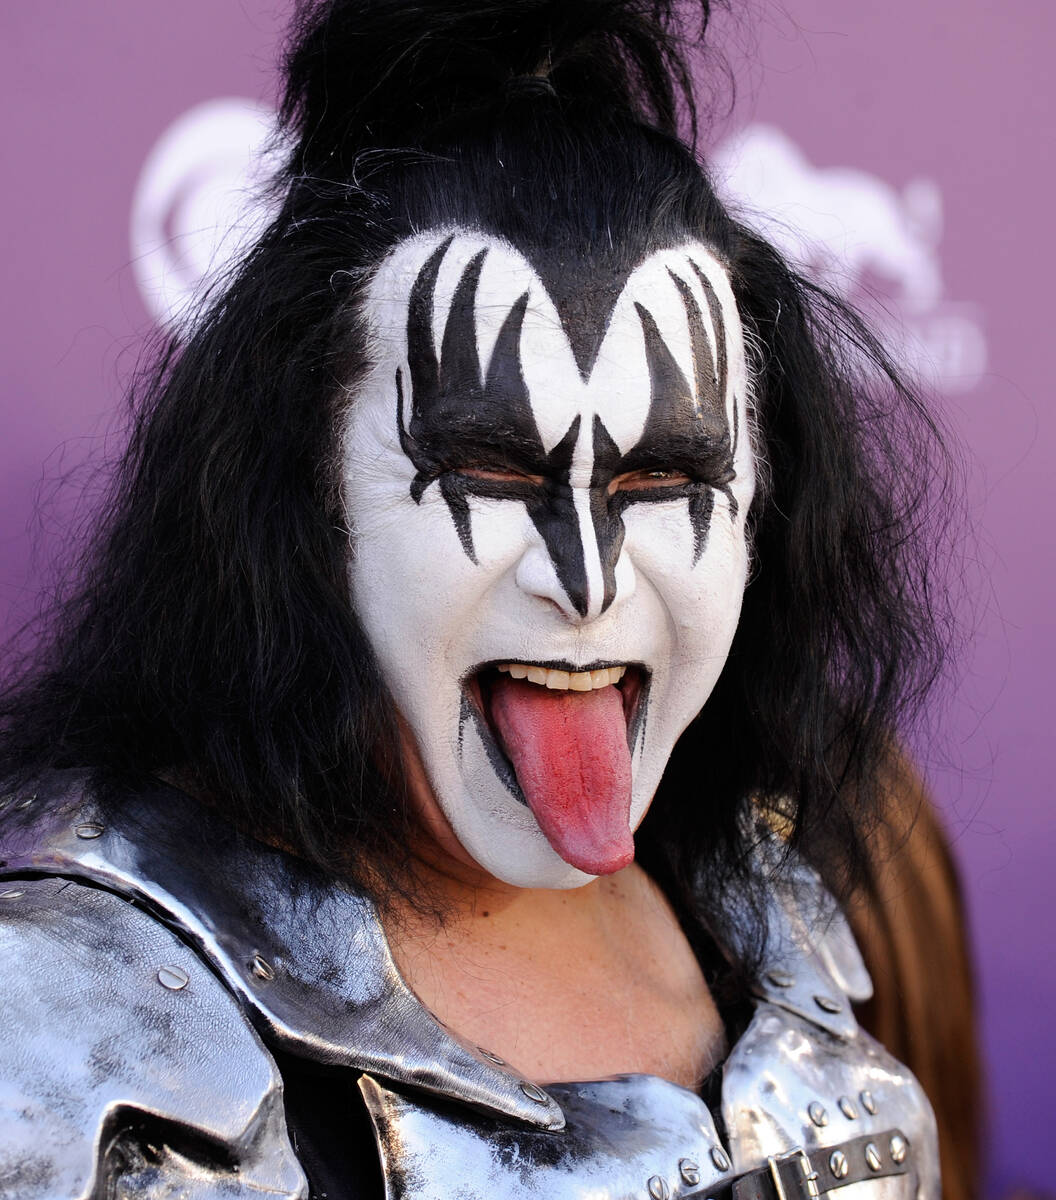 Musician Gene Simmons from KISS arrives at the 47th Annual Academy of Country Music Awards at t ...